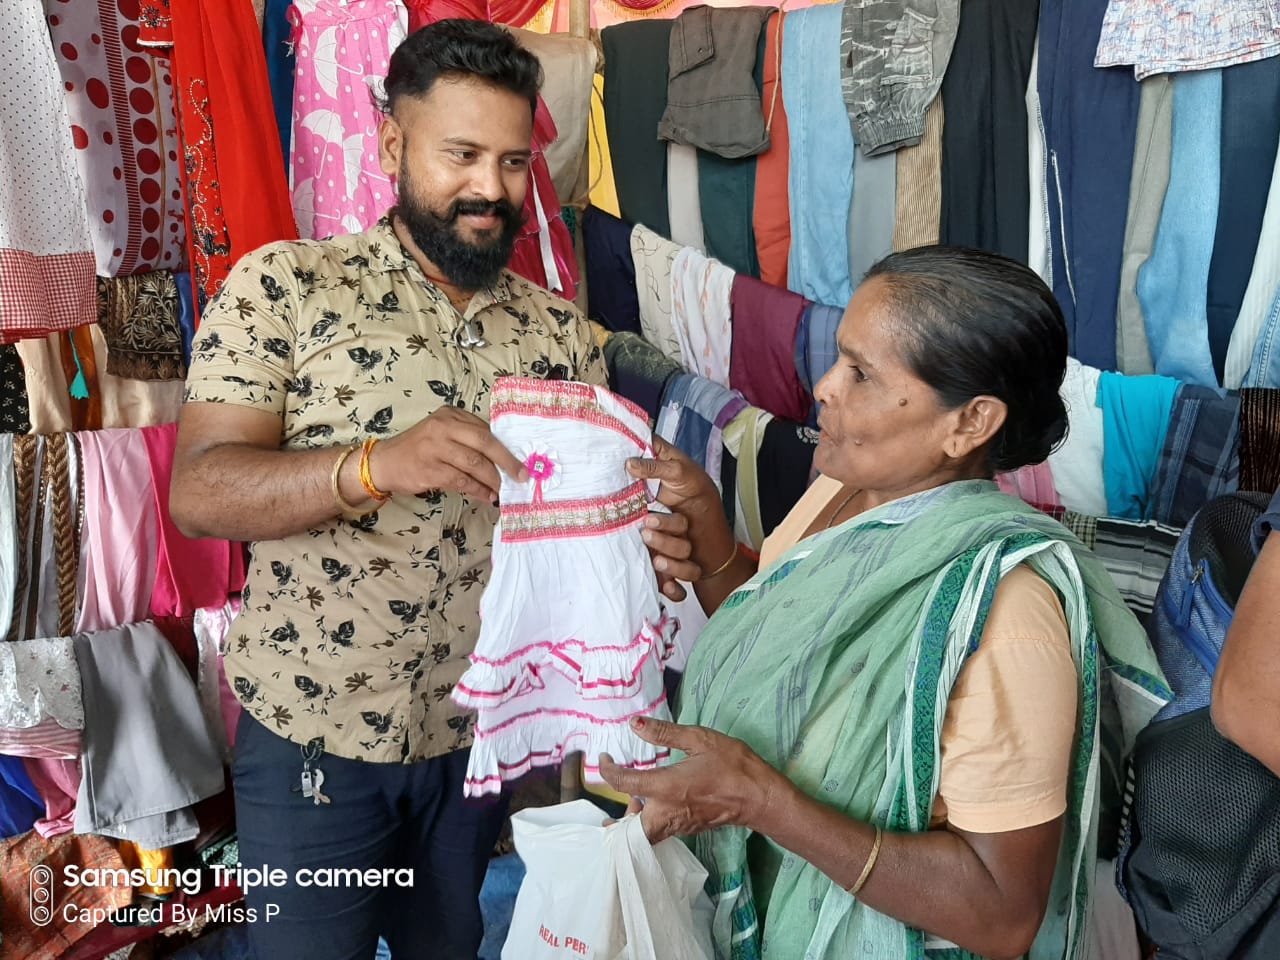 Distributing free clothes. (Source: Helping Hands)